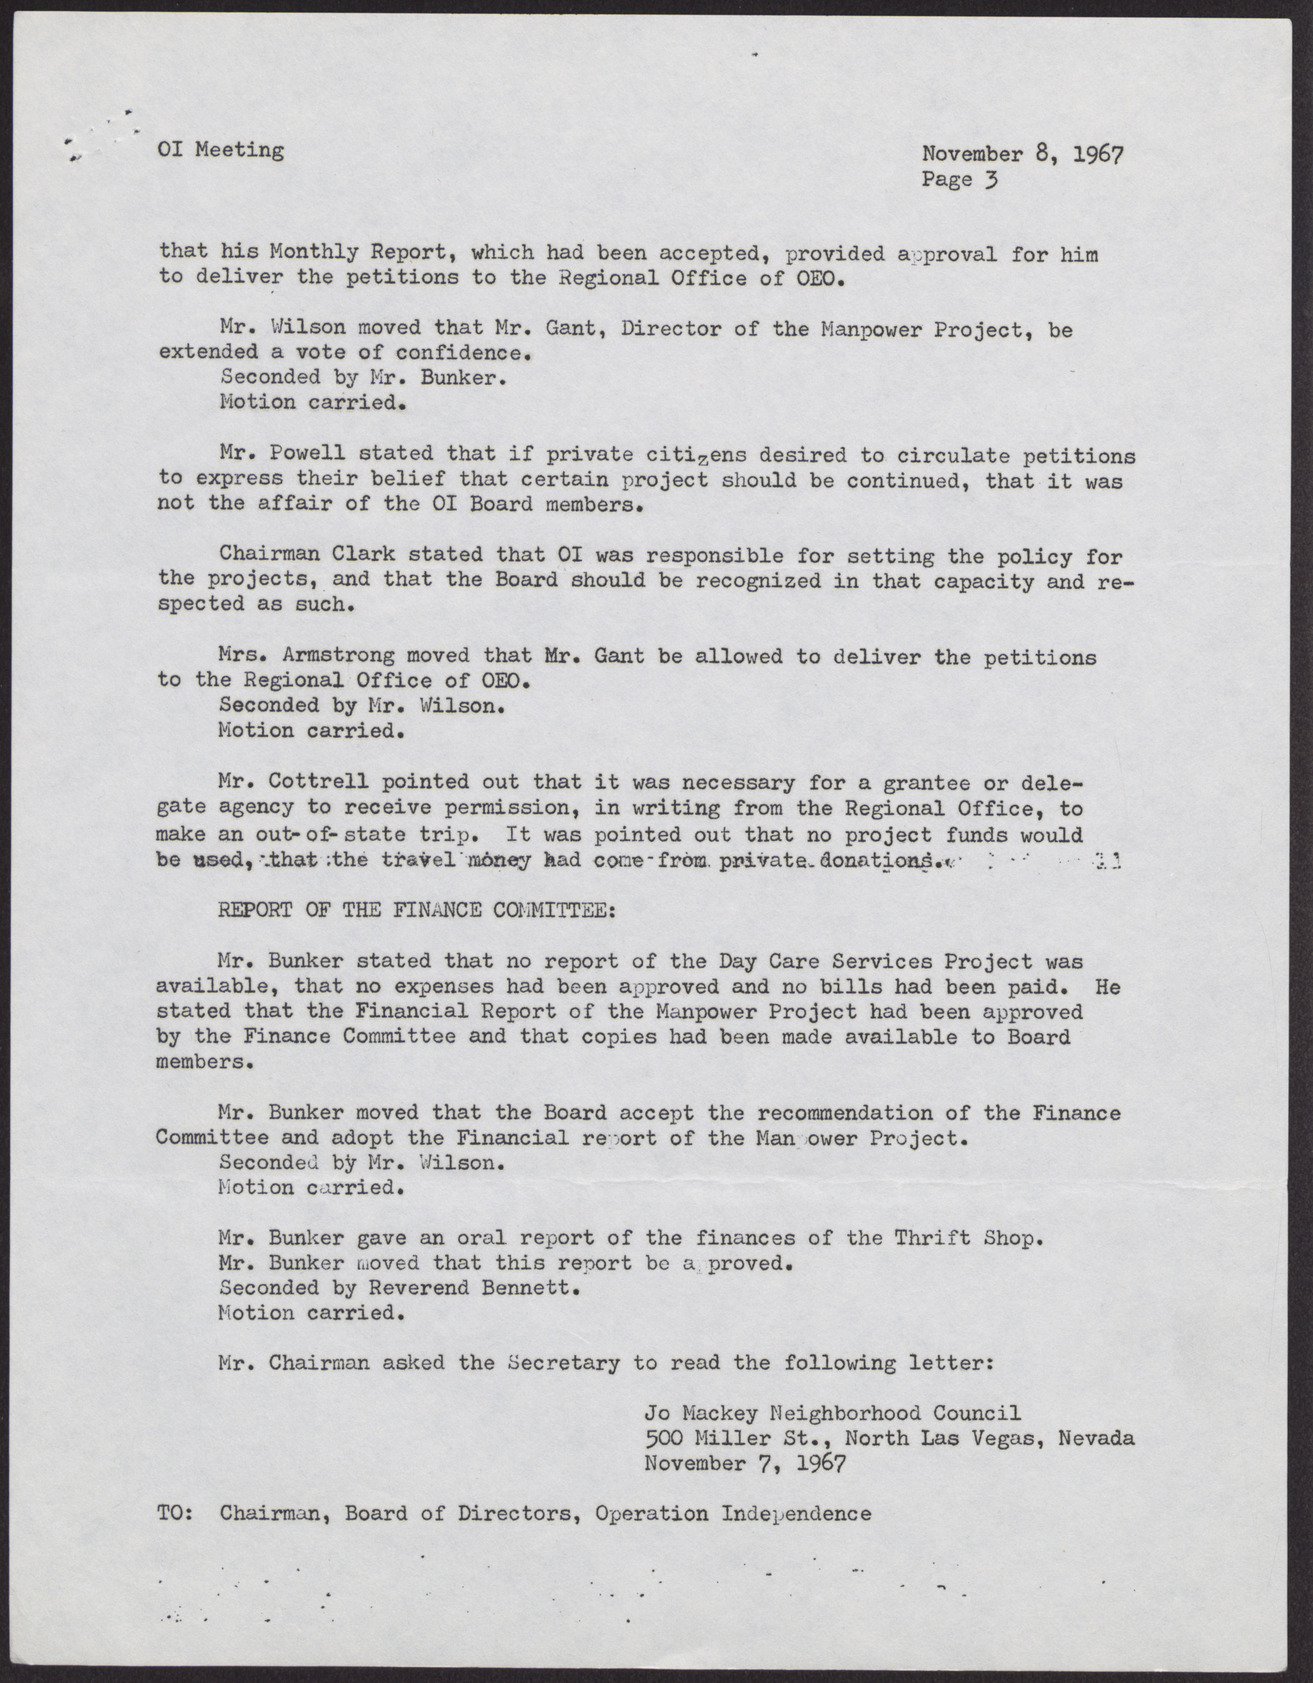 Minutes from Operation Independence Regular Board Meeting (4 pages), November 8, 1967, page 3